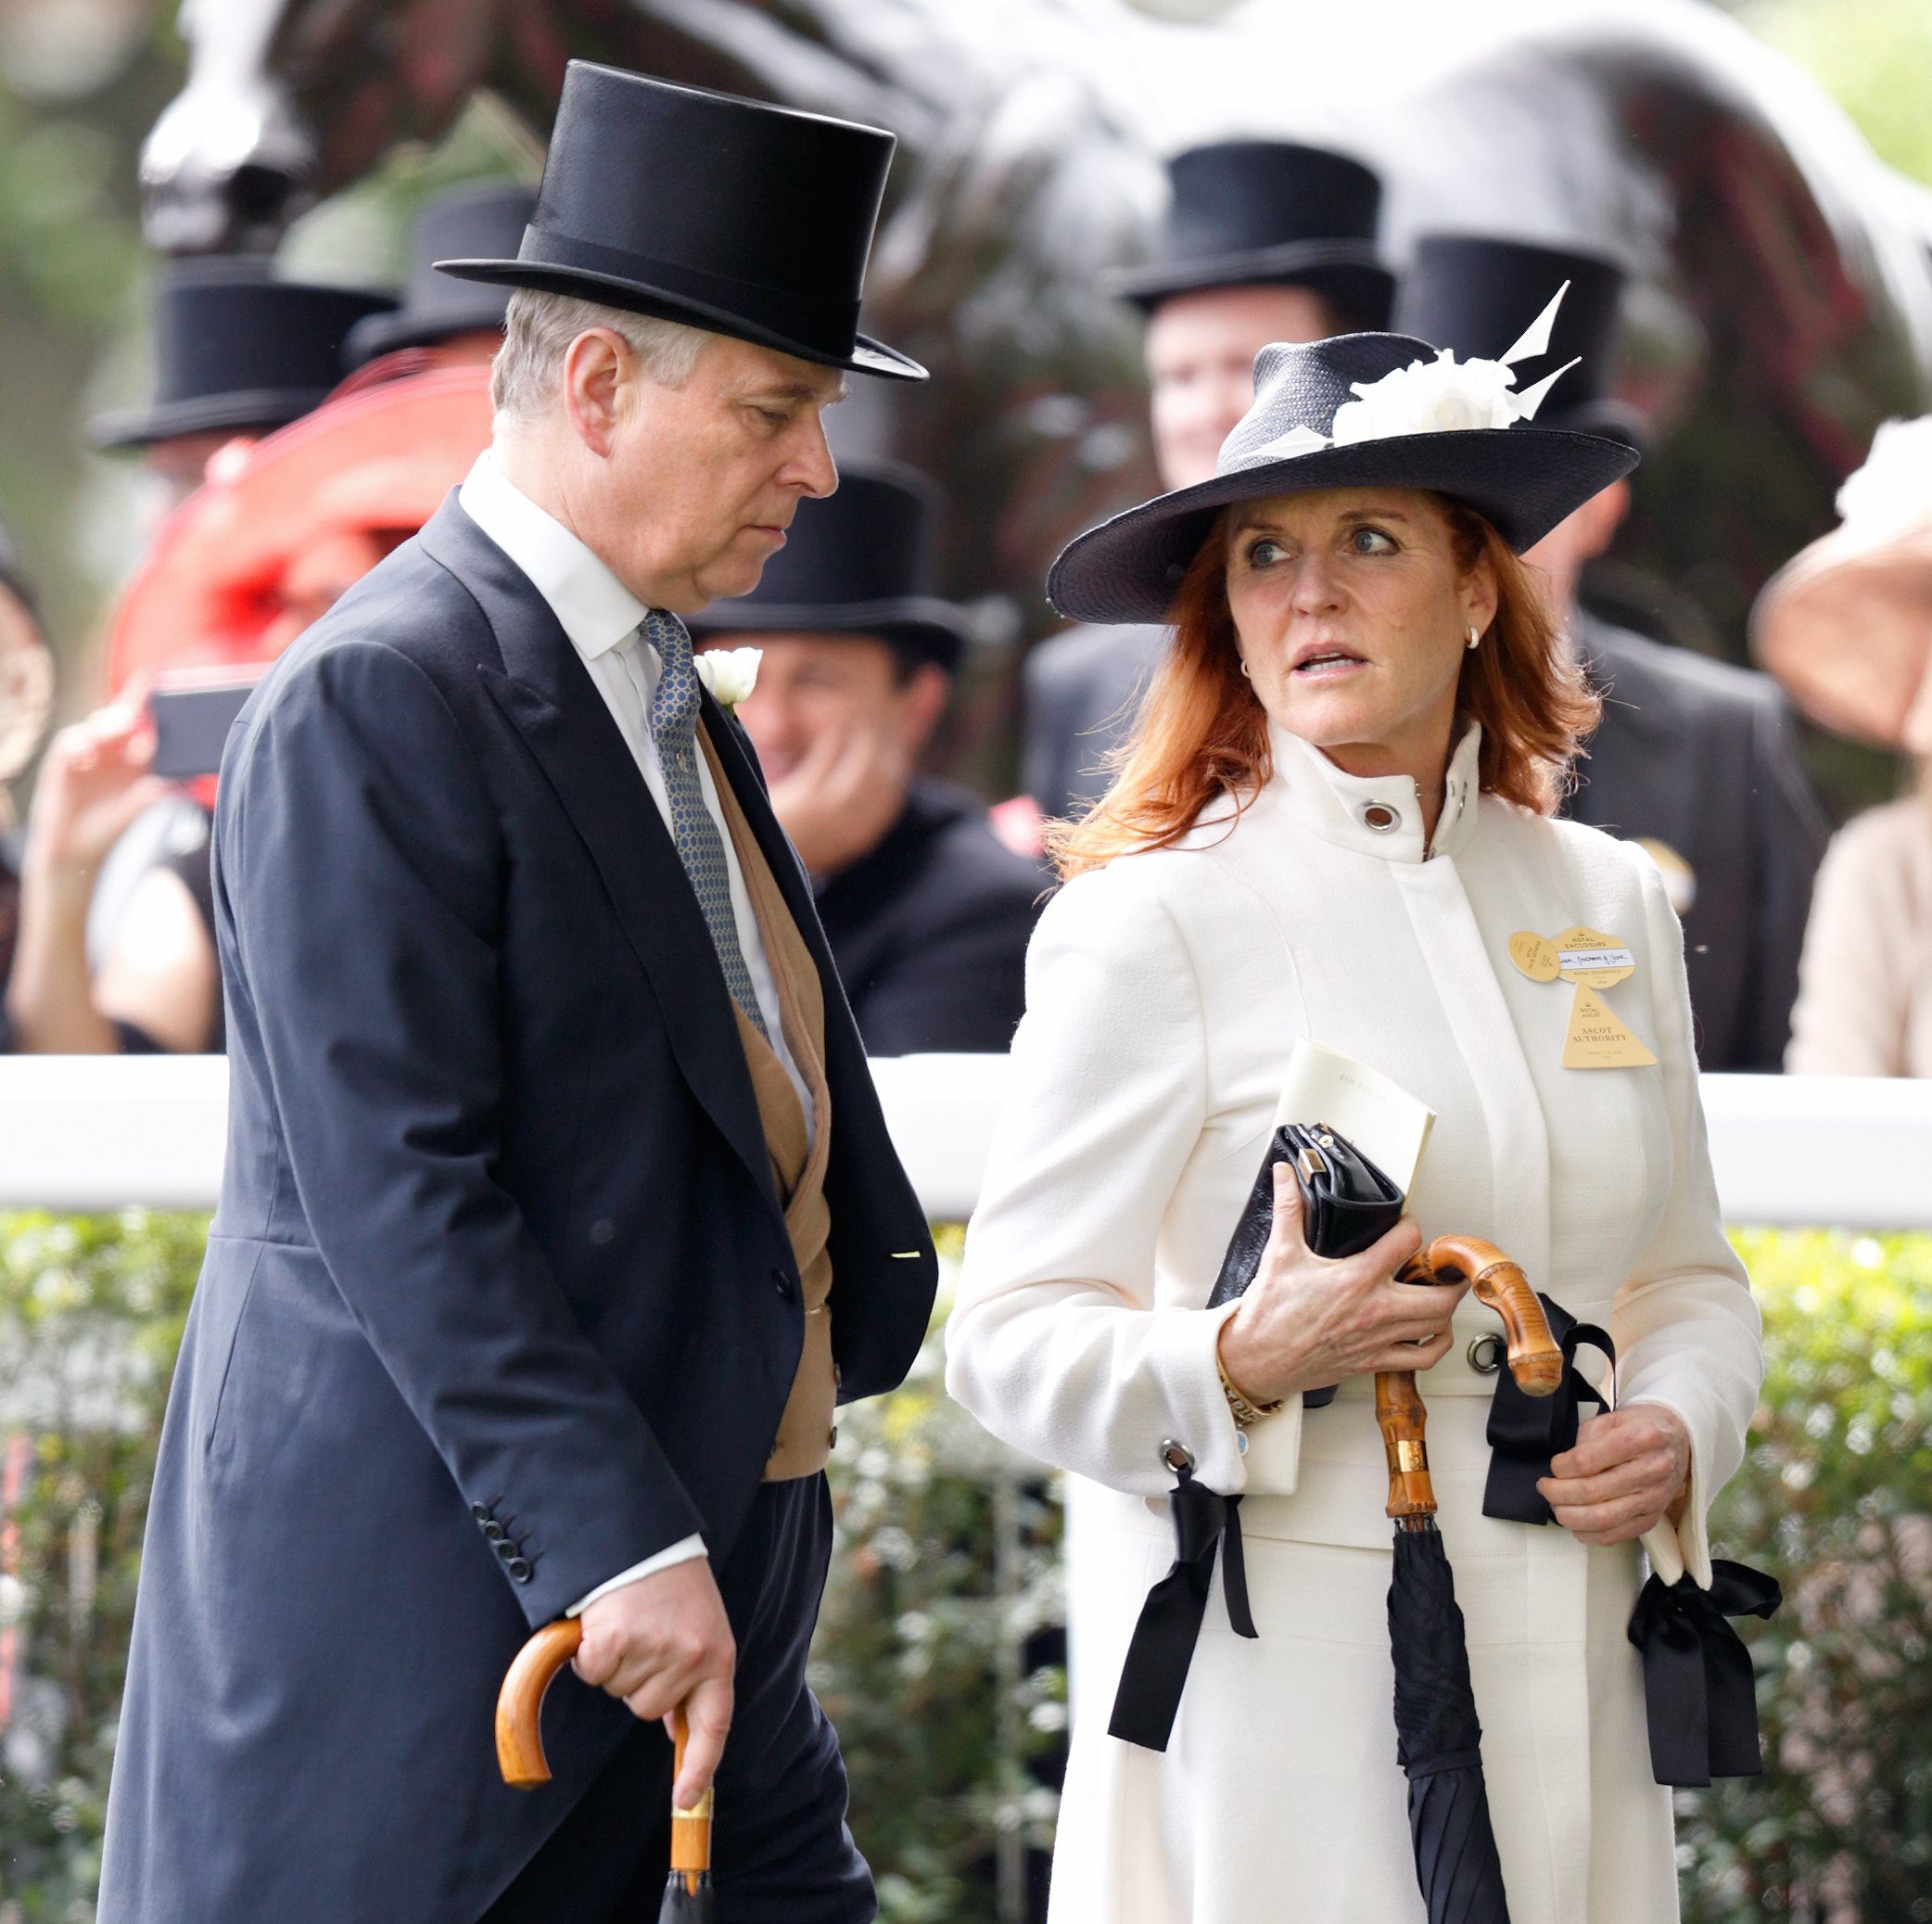 Sarah Ferguson and Prince Andrew. | Source: Getty Images